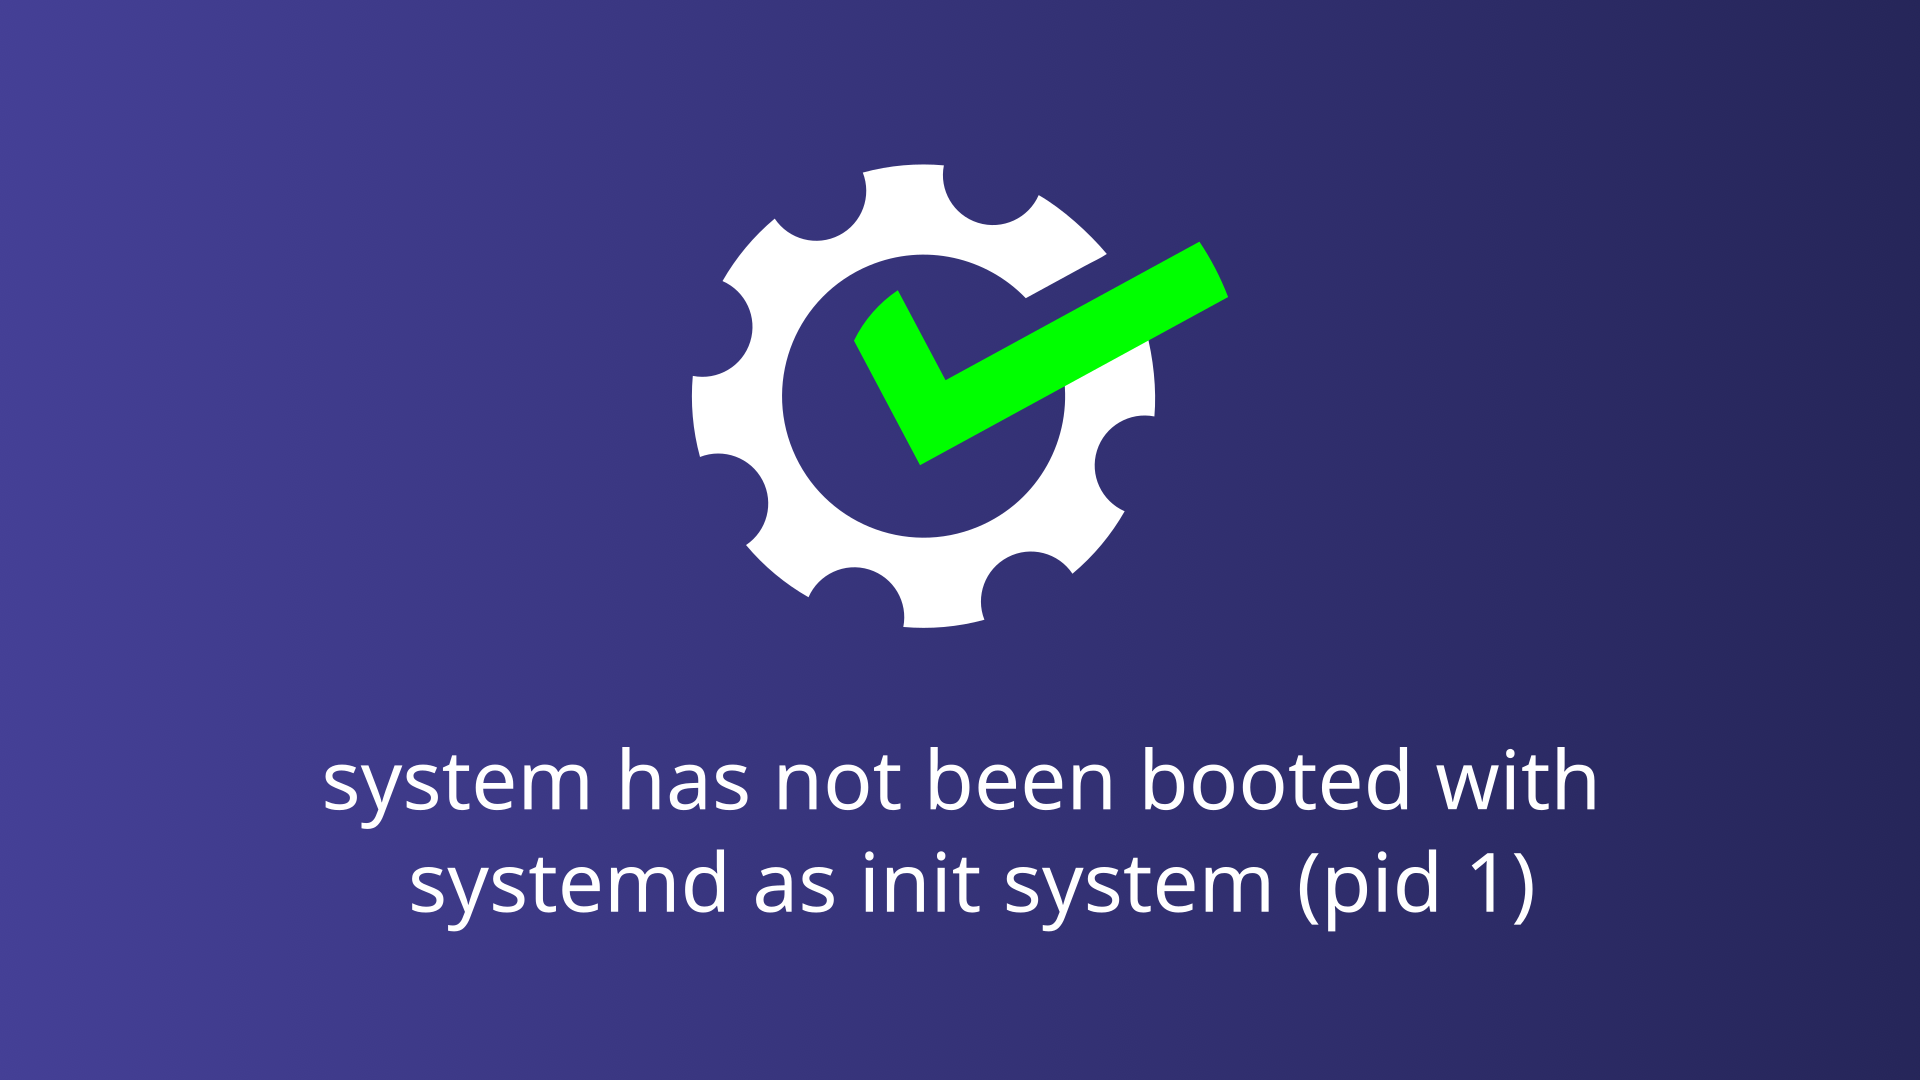 system has not been booted with systemd as init system (pid 1)